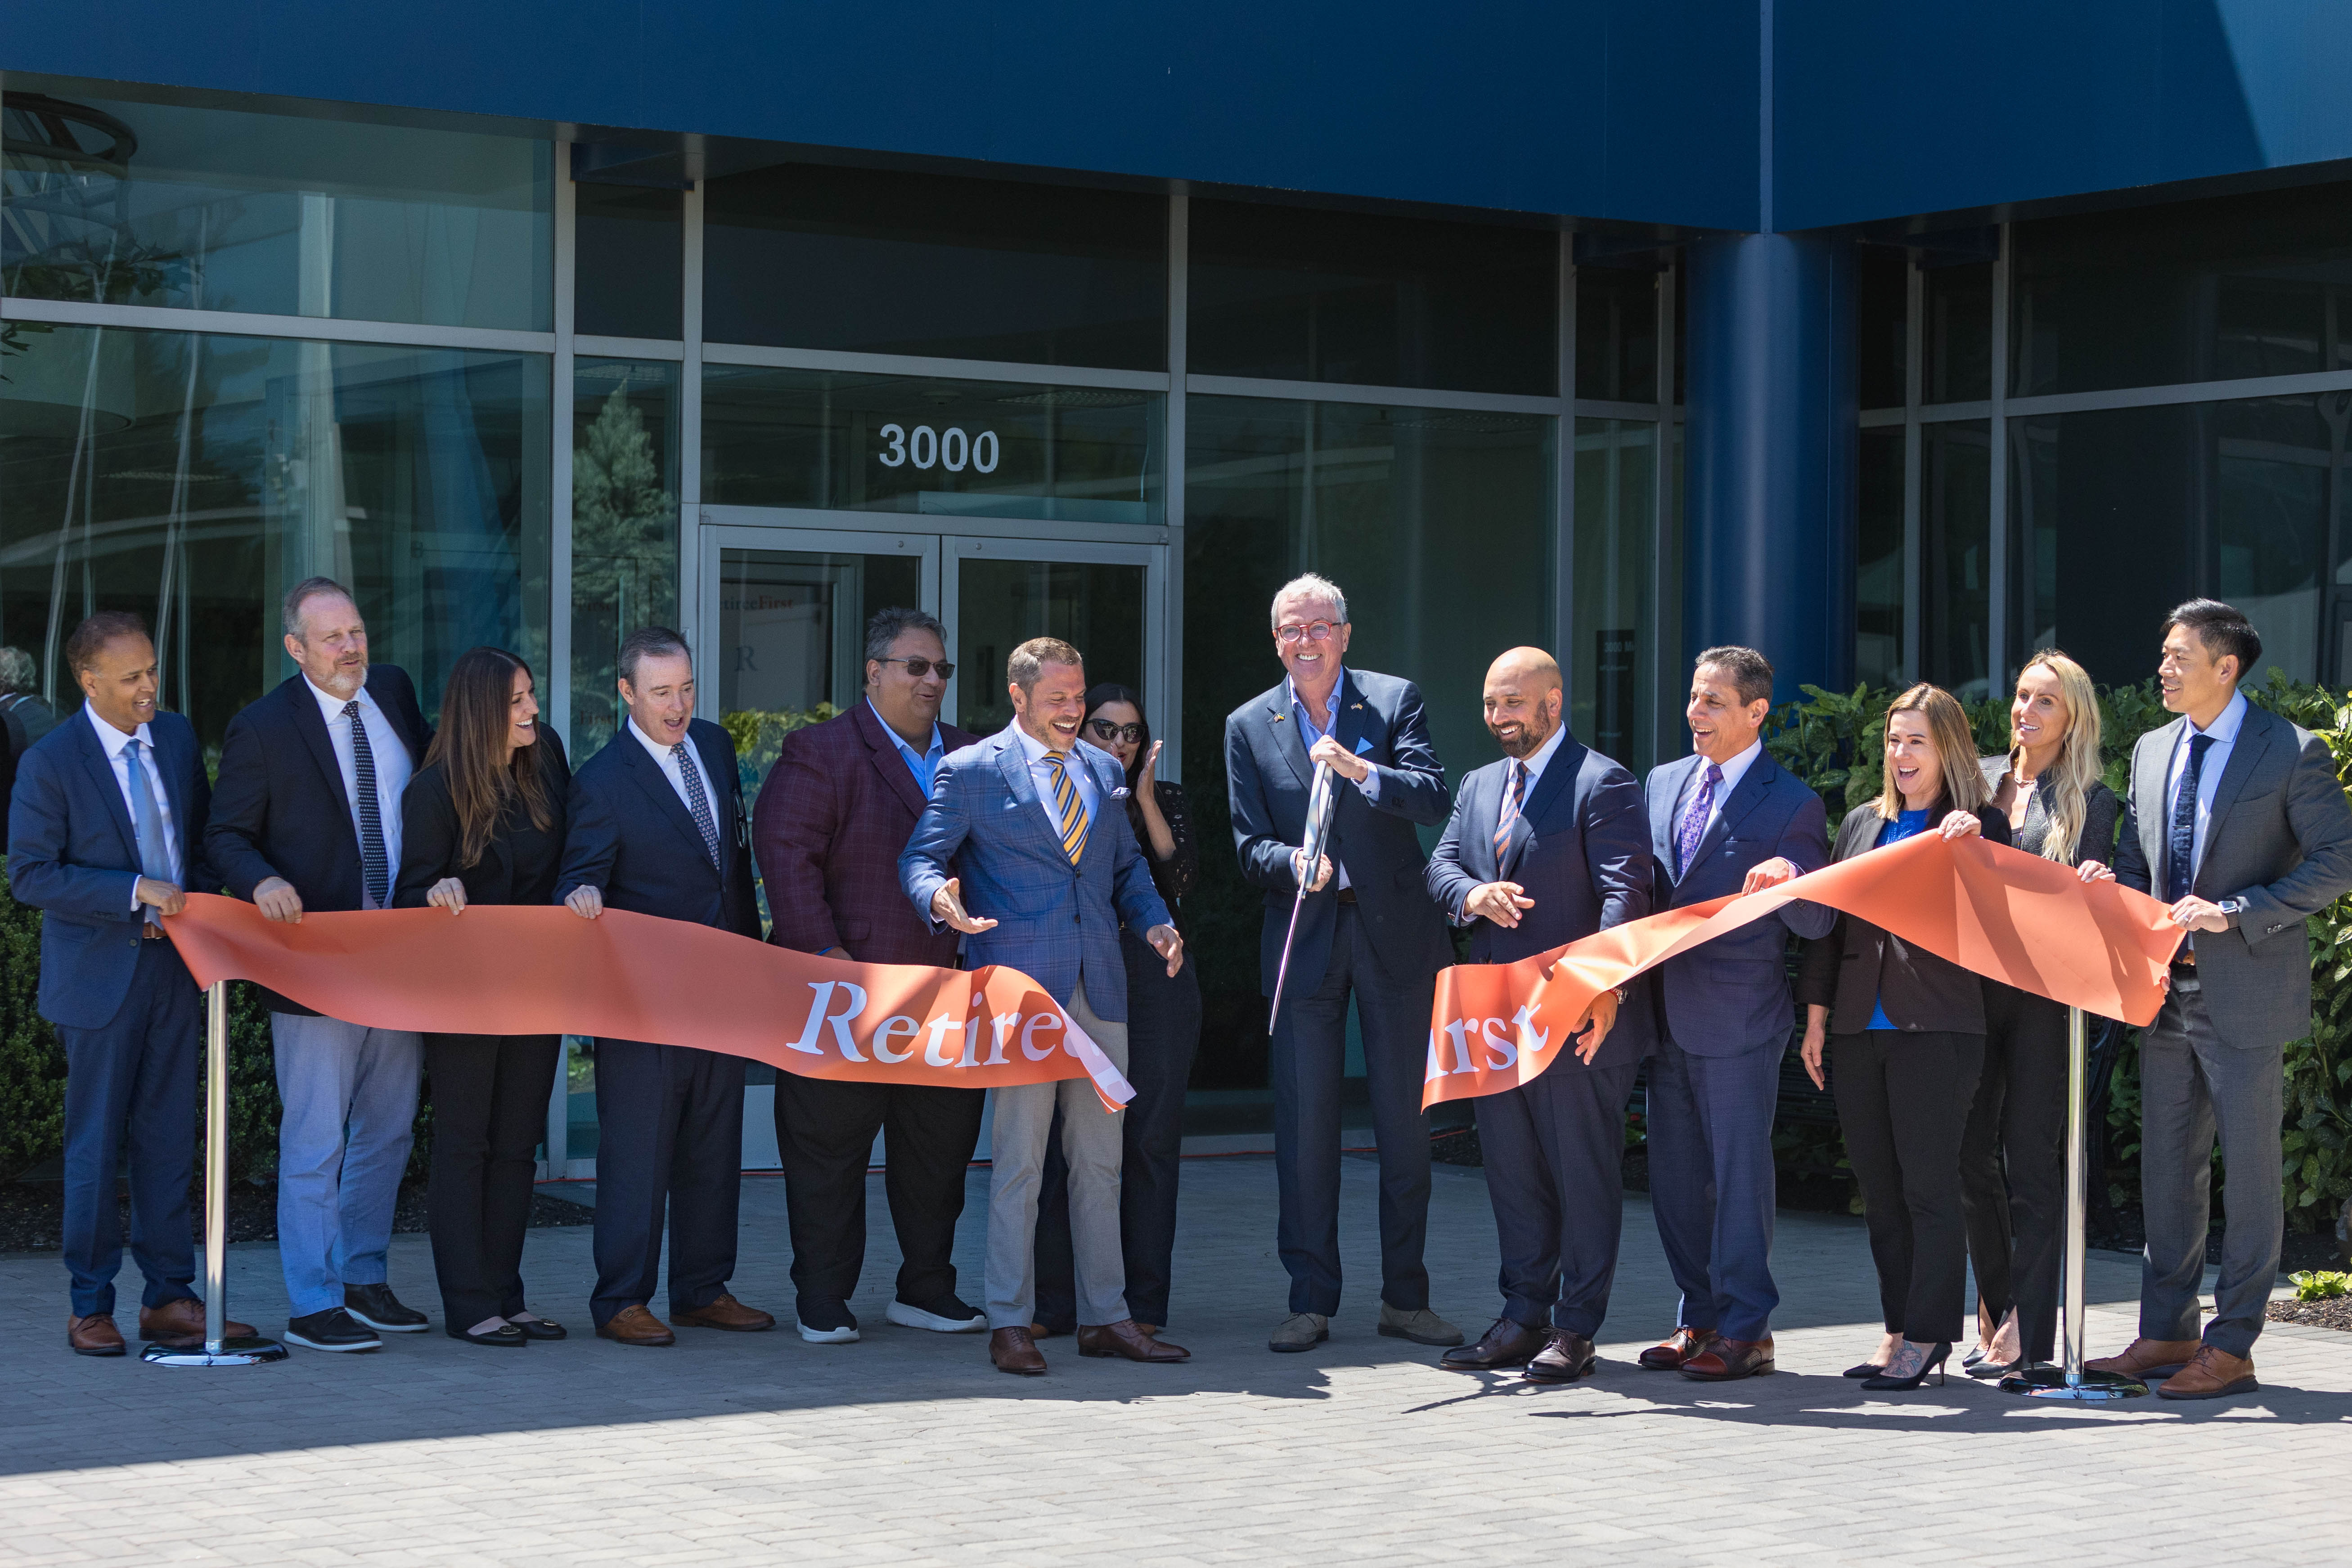 RetireeFirst Hosts Ribbon-Cutting Ceremony with New Jersey Governor Phil Murphy